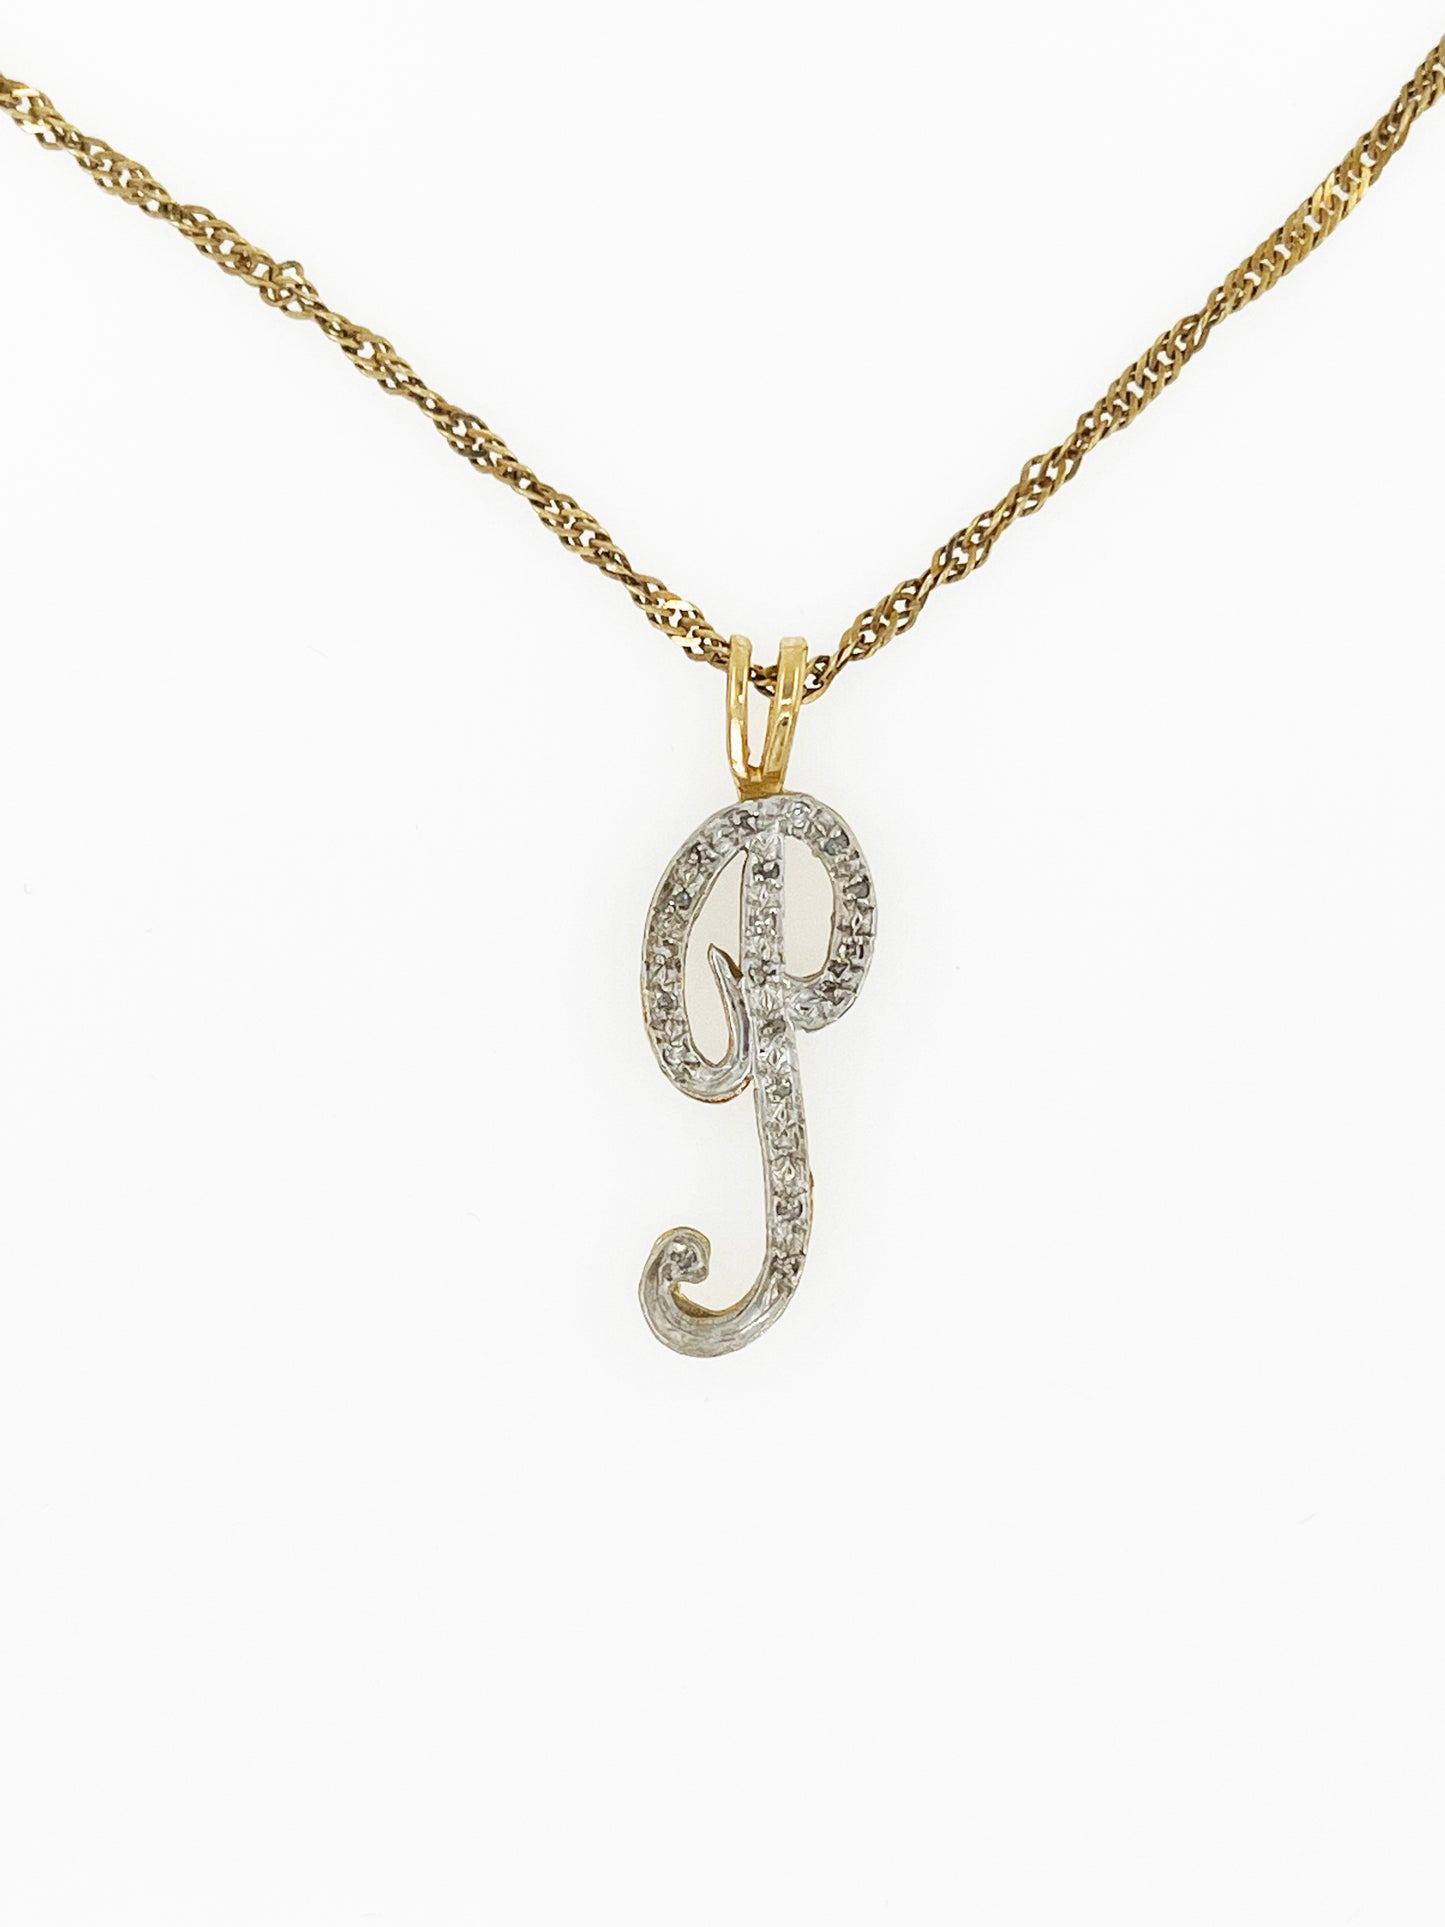 Made To Order Initial (Any Letter) Pendant By Maxwell The Jeweler